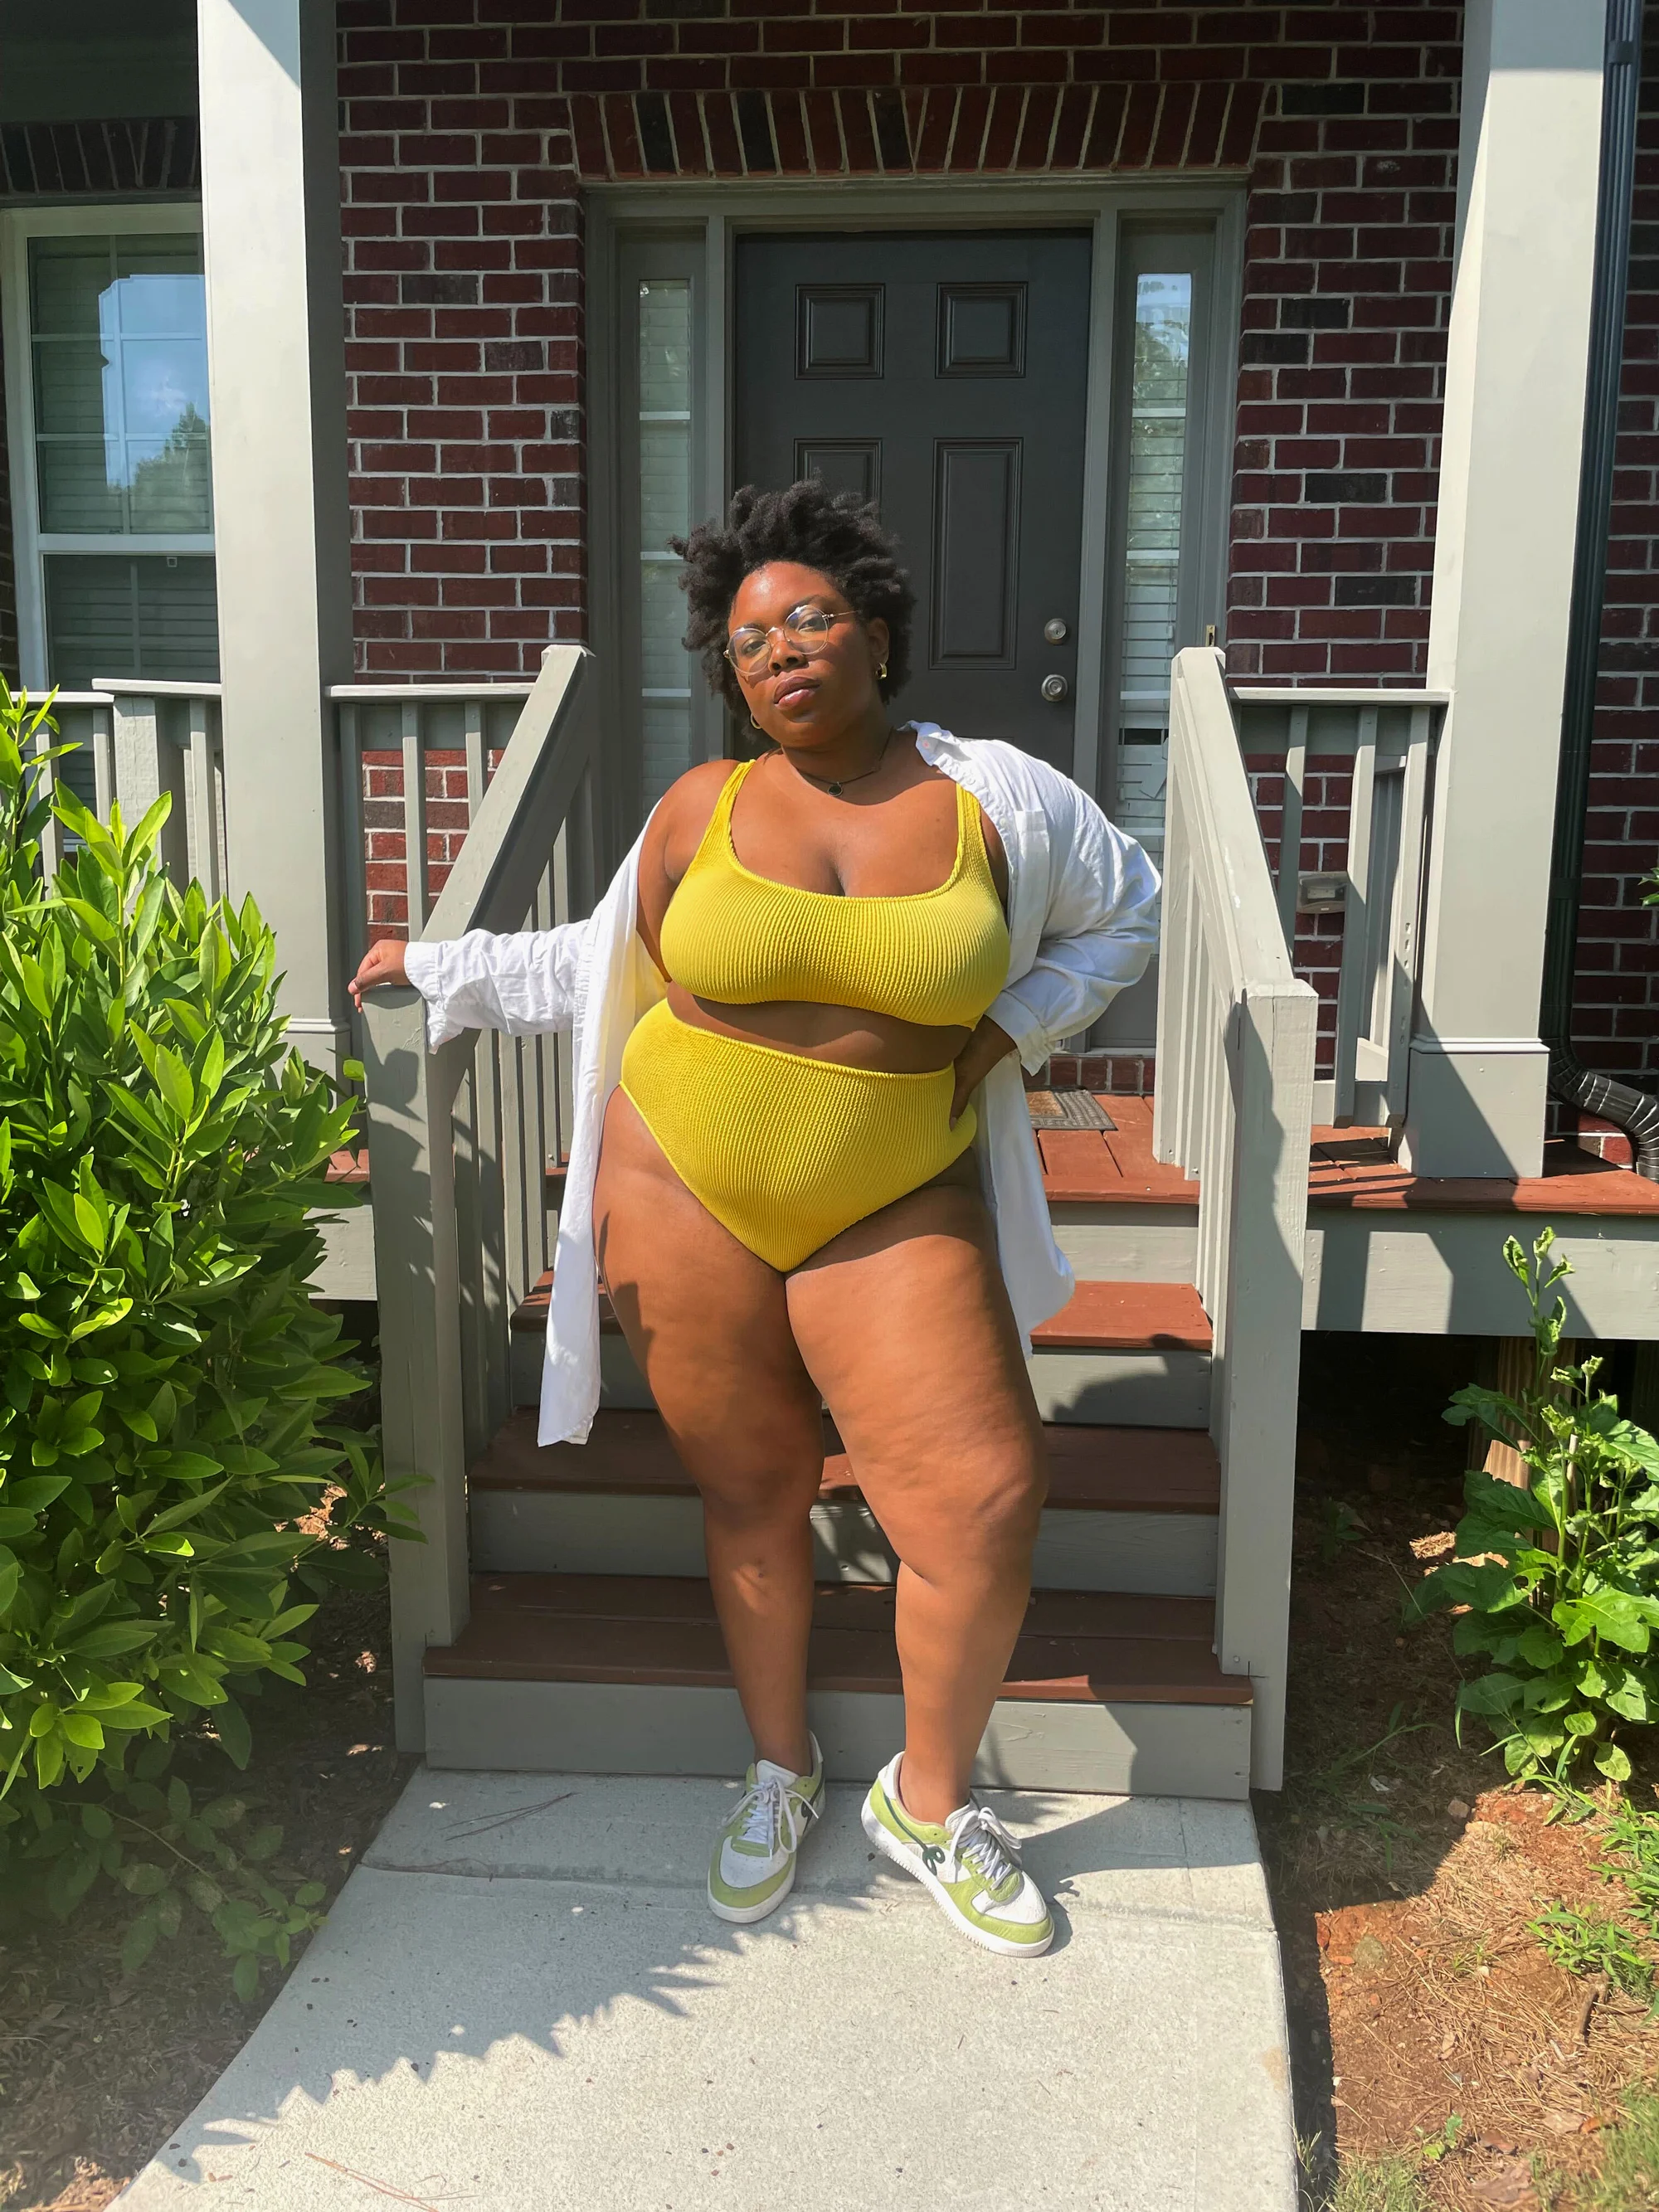 brittney nicole henderson recommends mature women in swimsuits tumblr pic